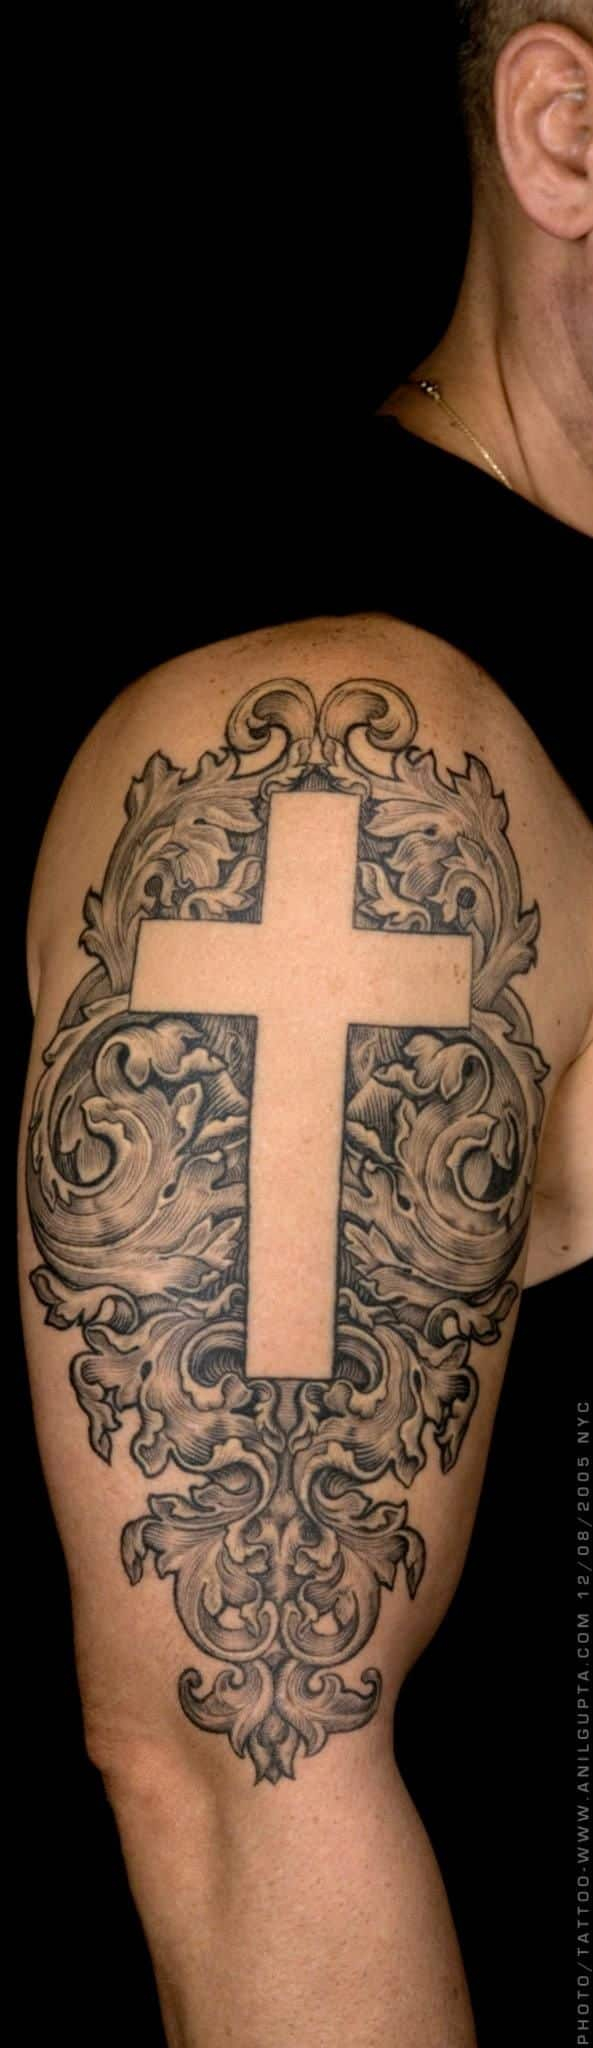 Cross Tattoos For Guys Tattoo Ideas And Designs For Men pertaining to size 593 X 2048